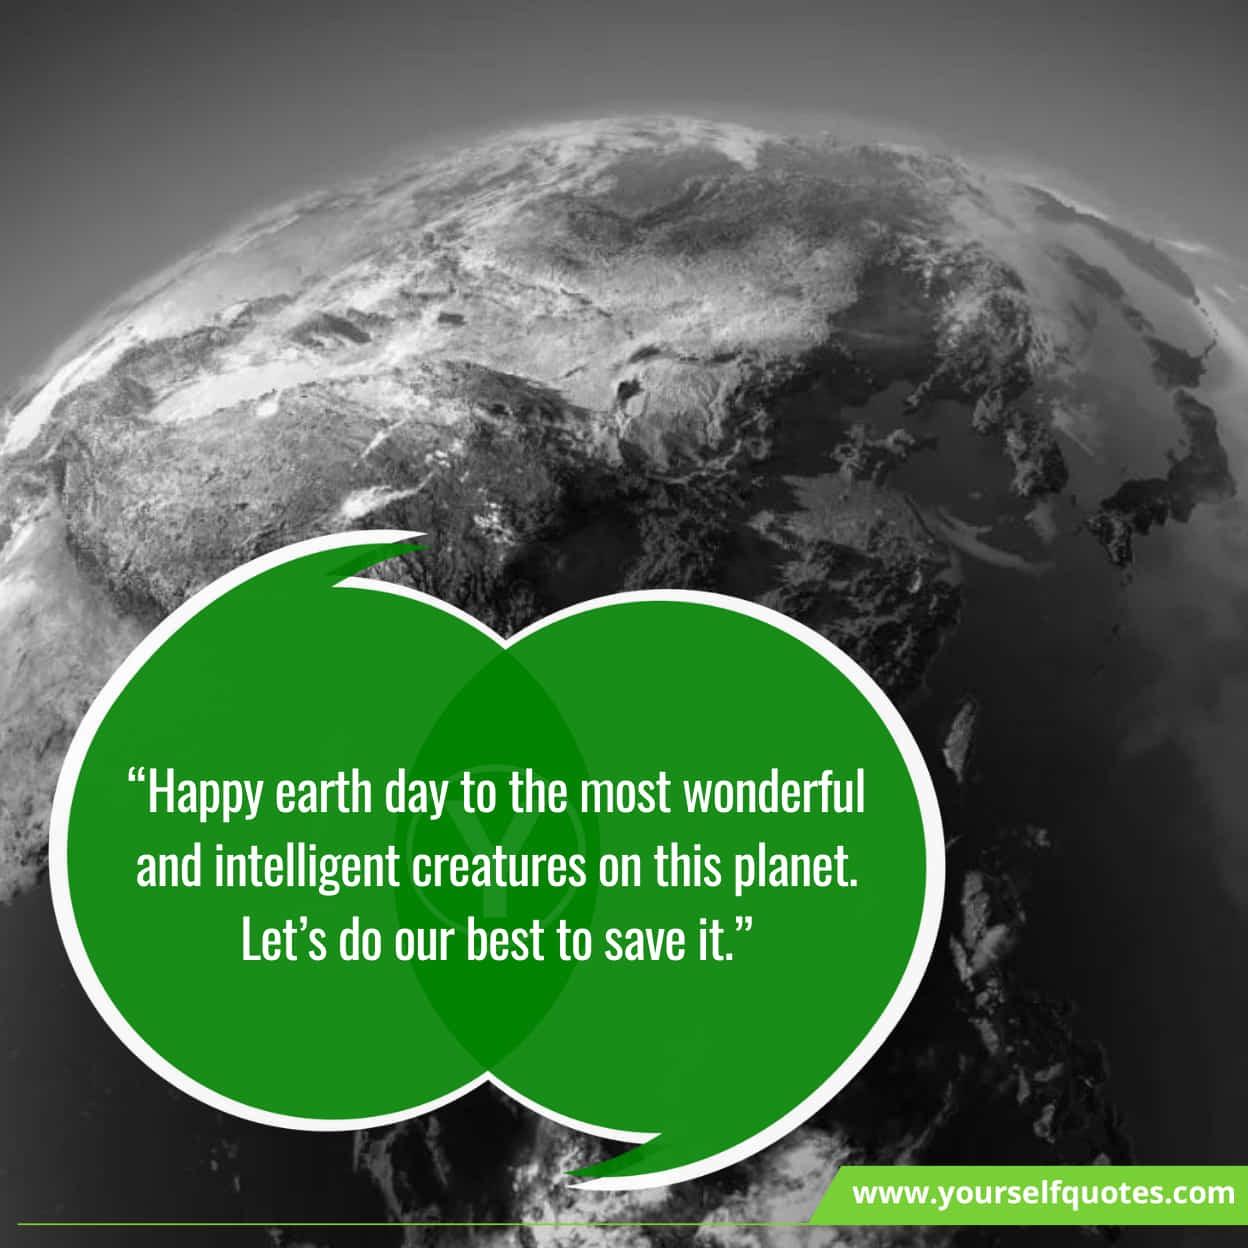 Earth Day Messages & Slogans